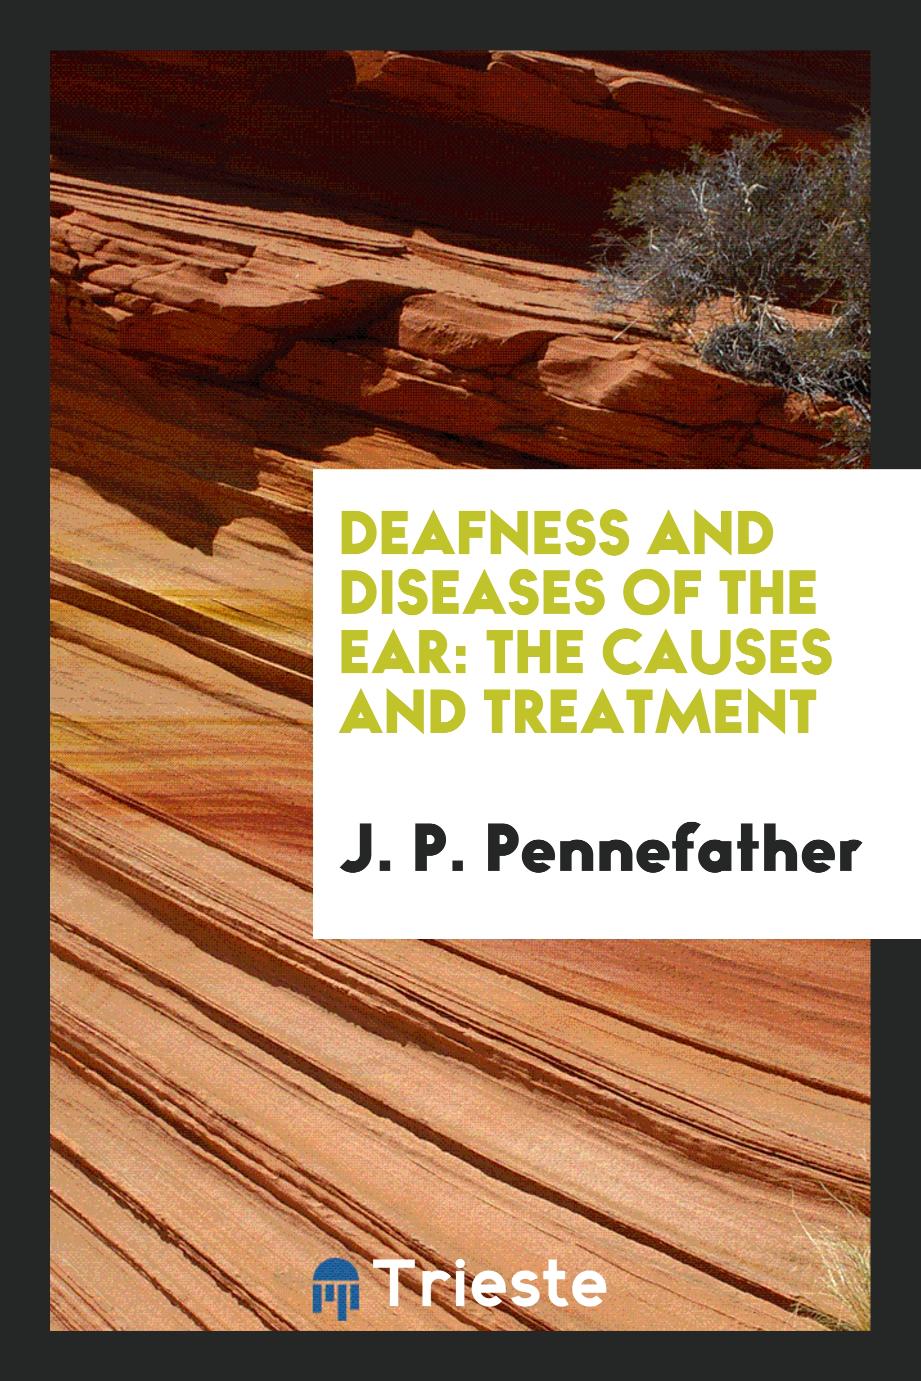 Deafness and Diseases of the Ear: The Causes and Treatment